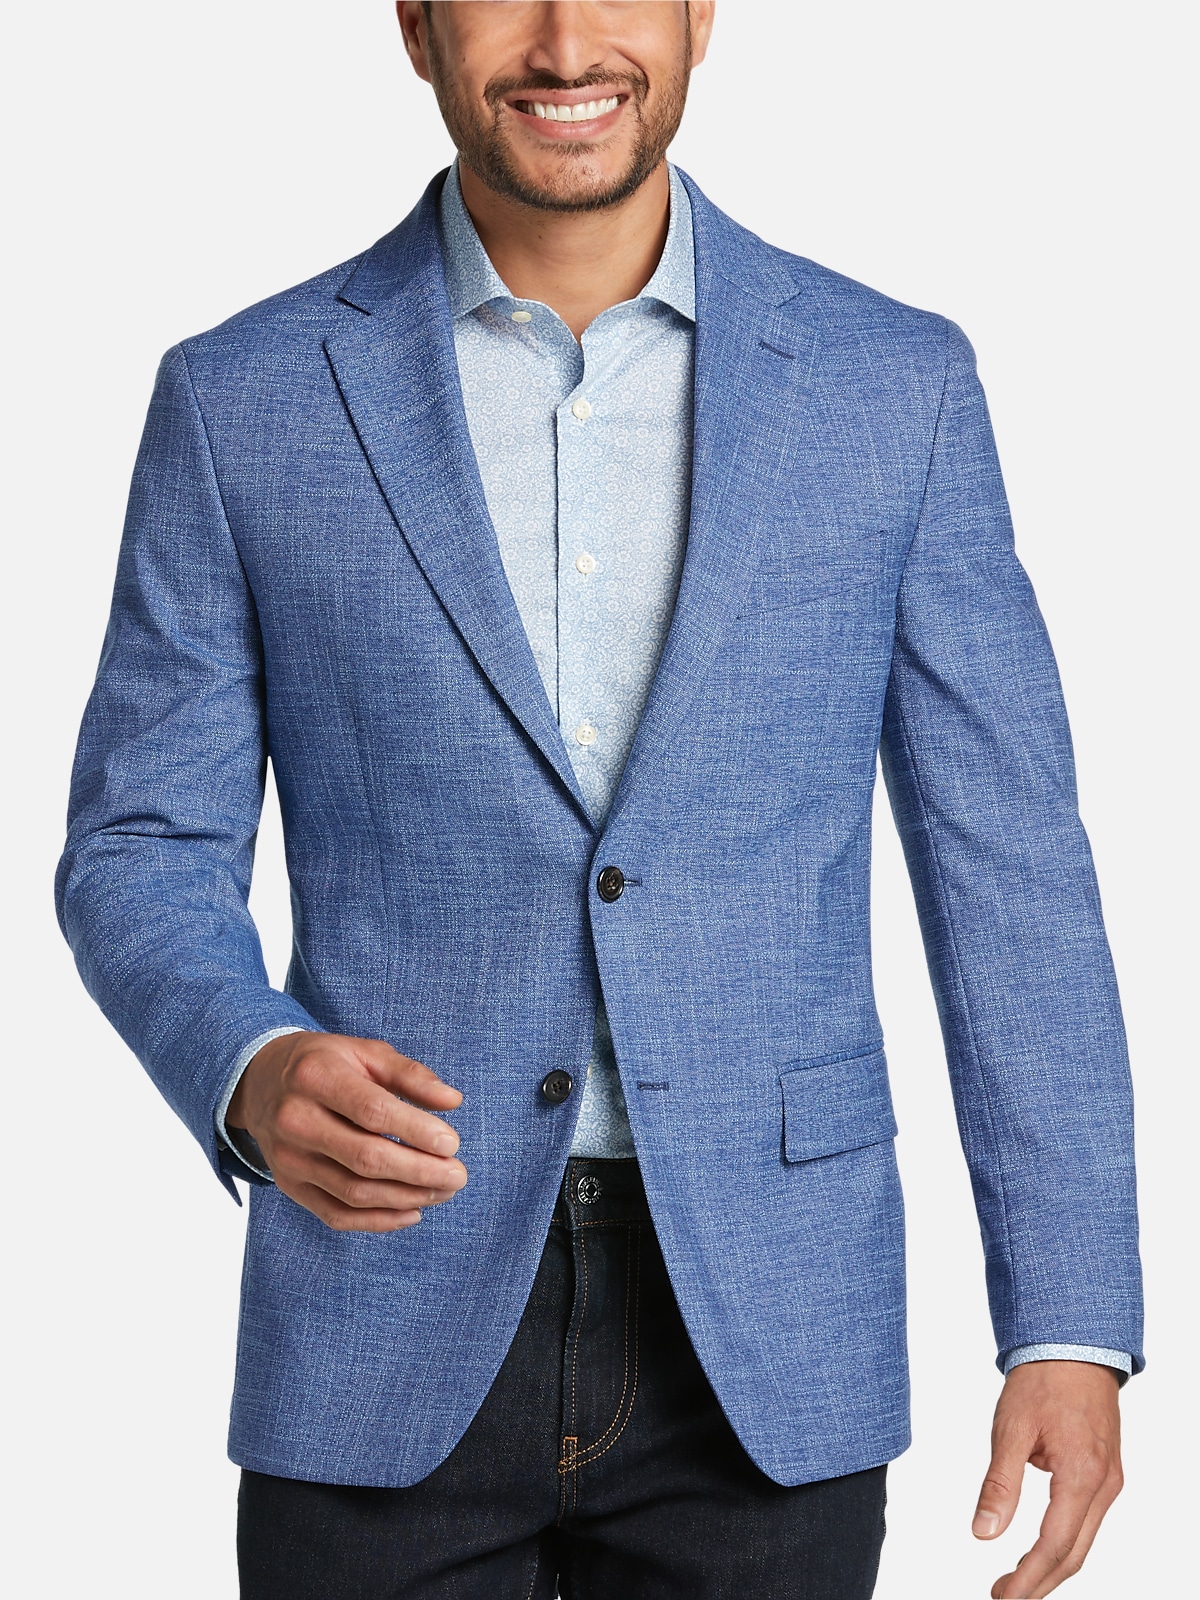 https://image.menswearhouse.com/is/image/TMW/TMW_16DL_15_LAUREN_BY_RALPH_LAUREN_SPORT_COATS_LIGHT_BLUE_MAIN?imPolicy=pdp-zoom-mob